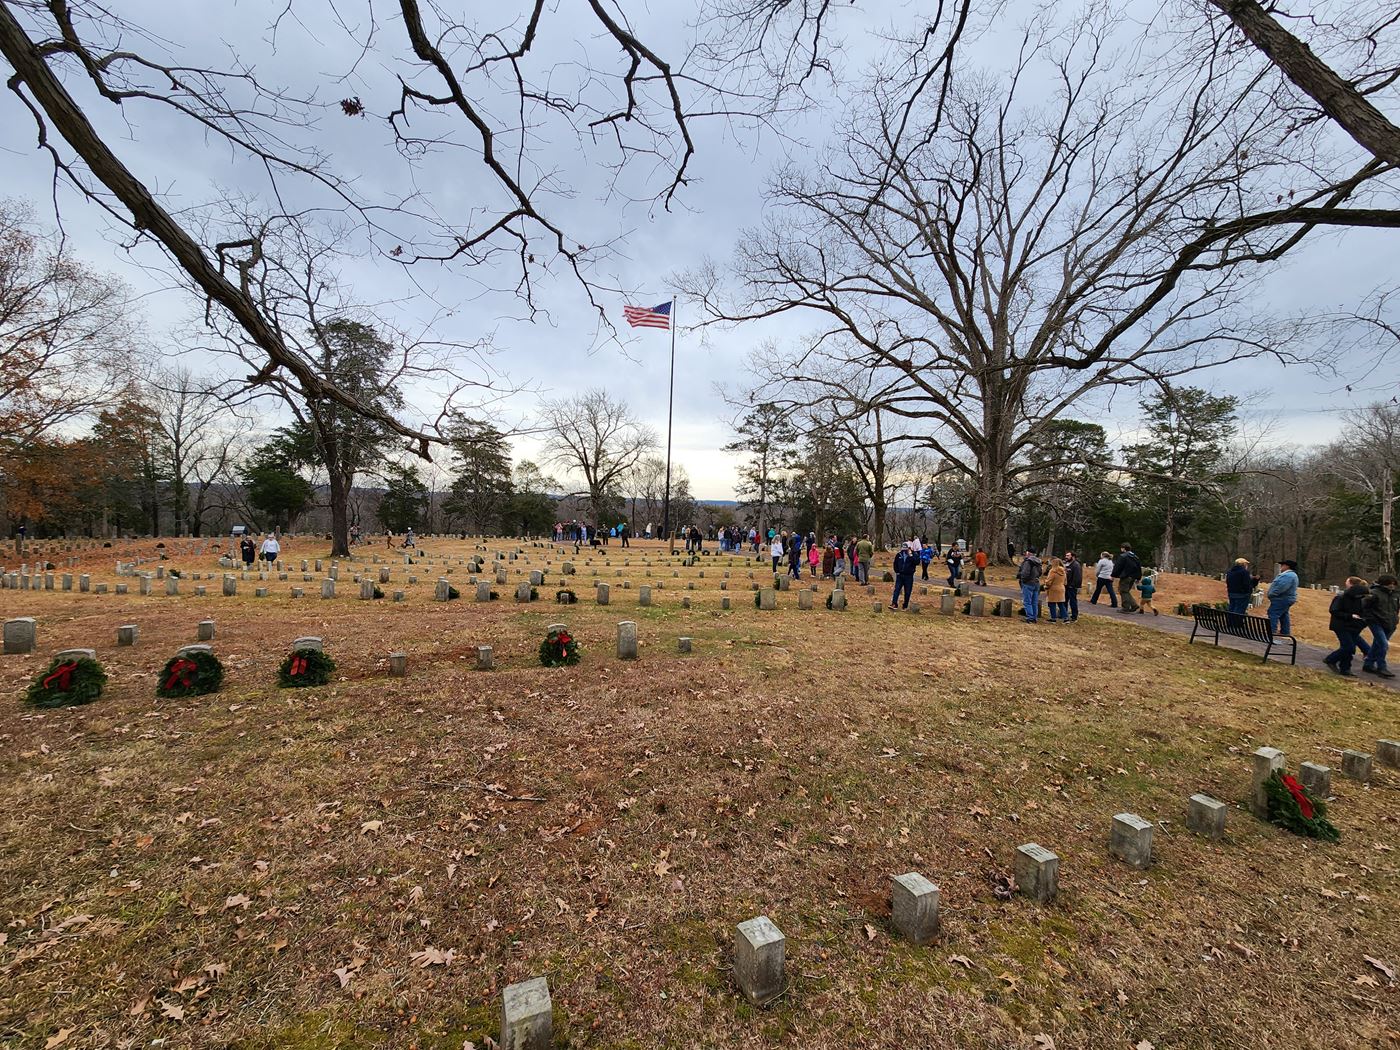 444 wreaths placed among the confederate burial trenches and the graves within the cemetery - honoring and remembering all Americans who gave ALL and teaching our youth